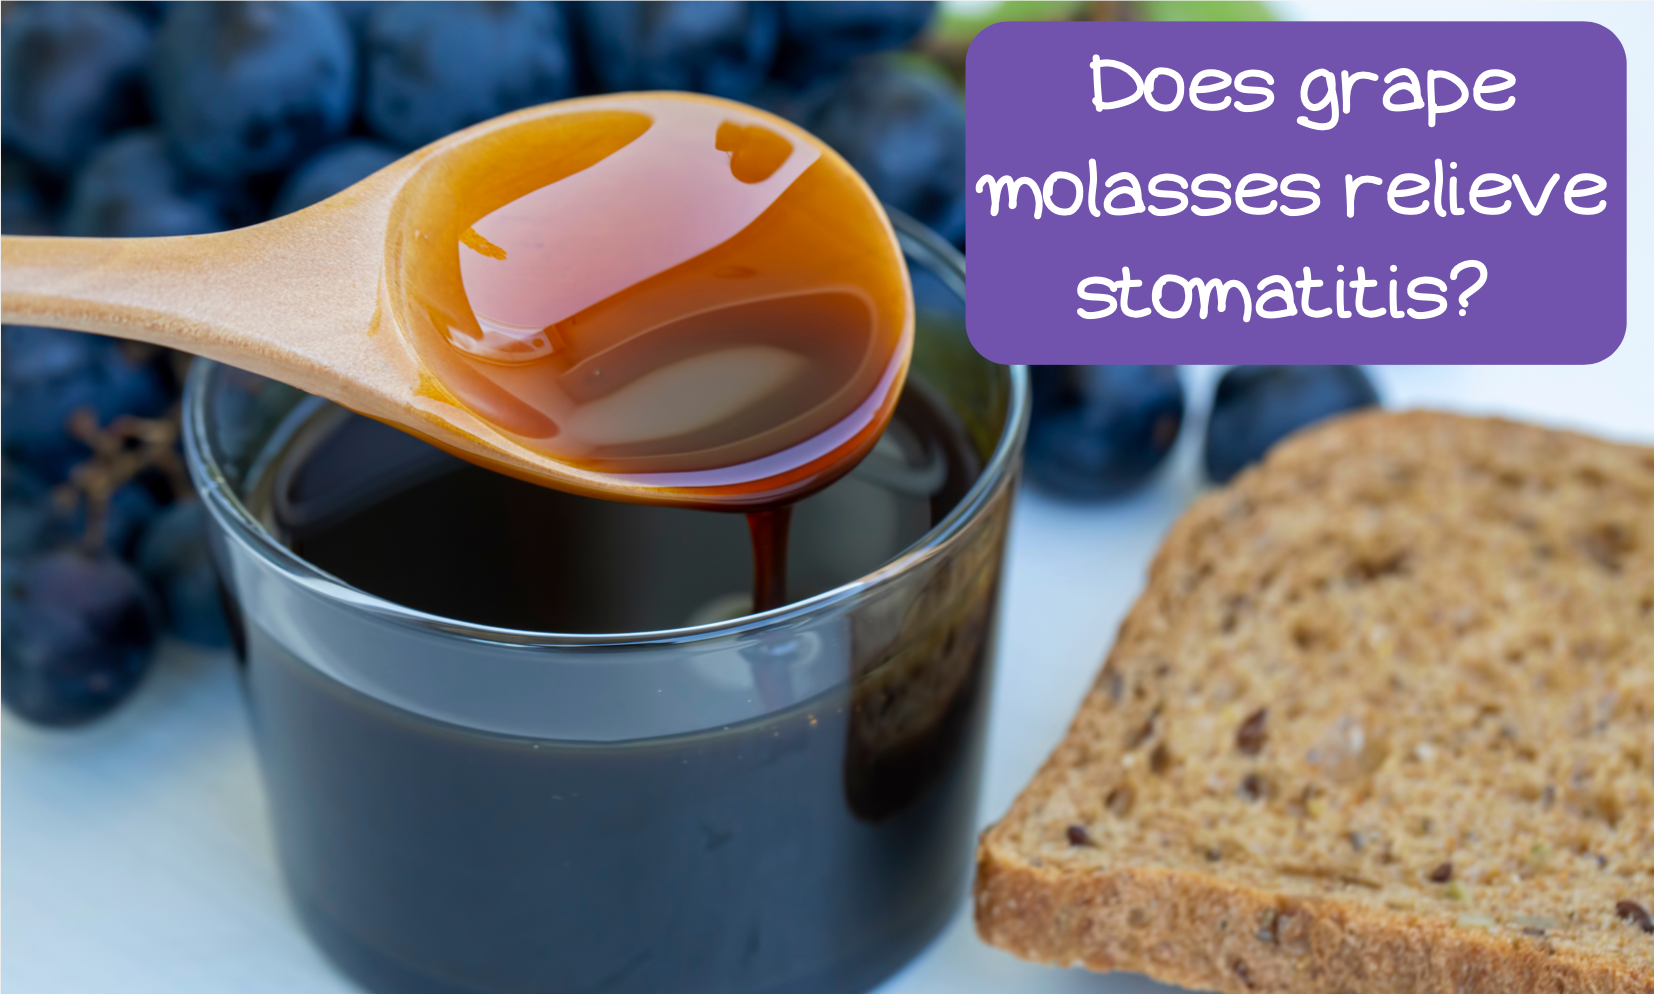 Grape molasses improved swallowing and appetite and reduced pain and fatigue in chemotherapy.